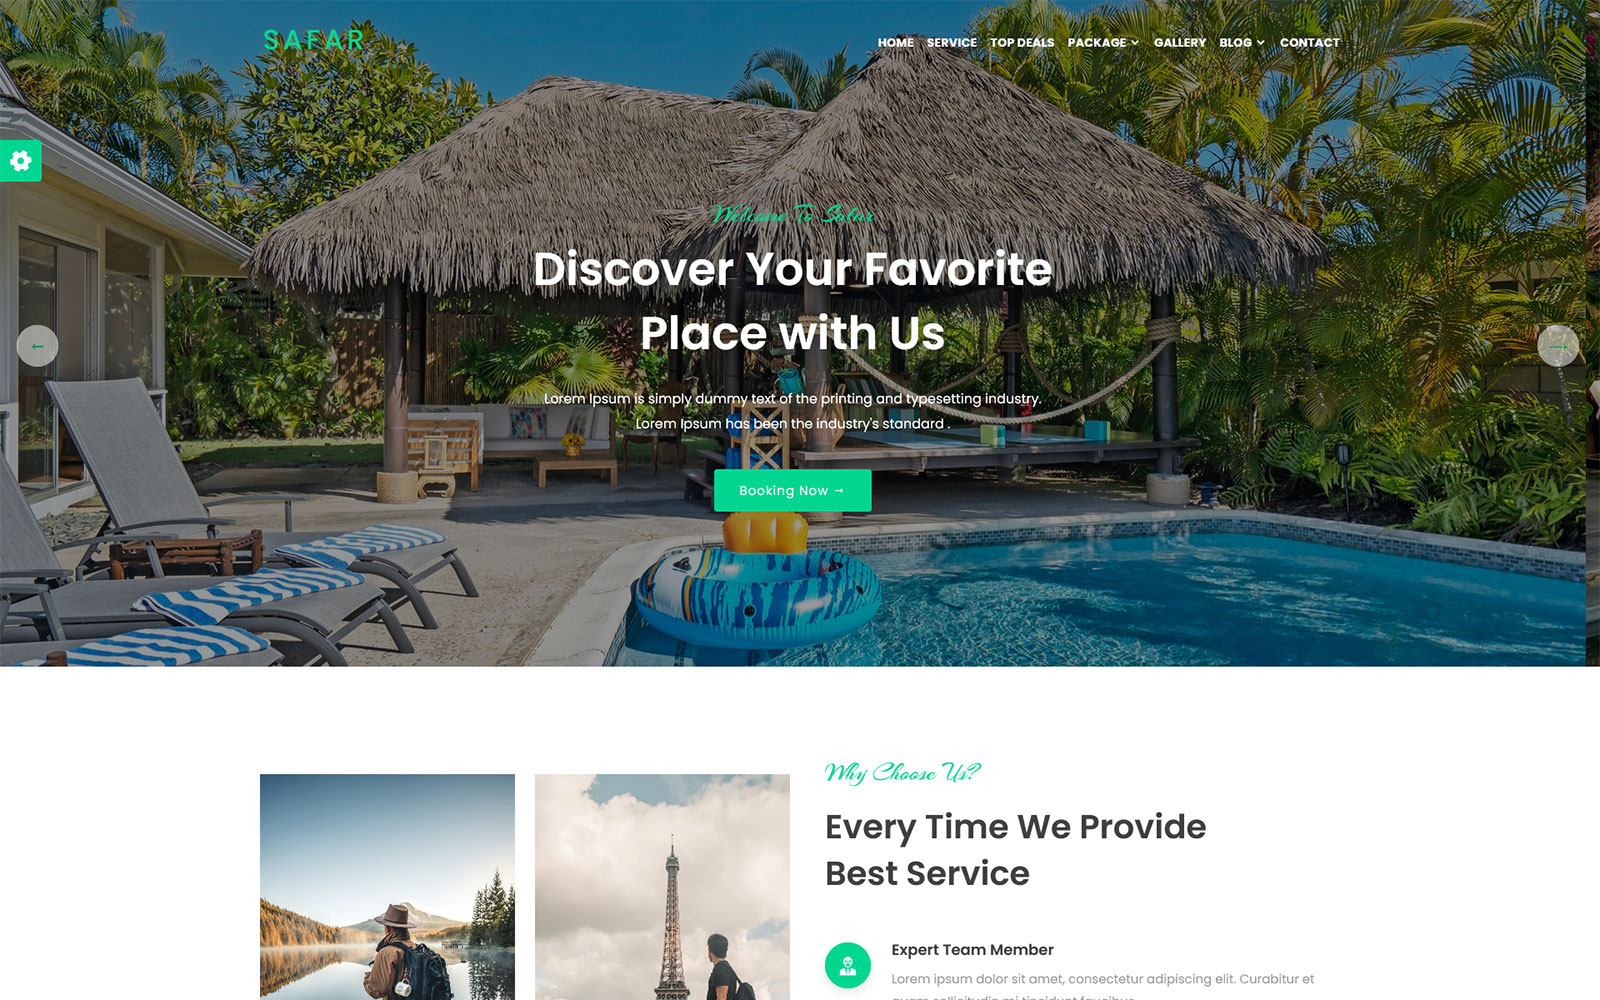 Safar - Tour and Travel Agency Landing Page Template